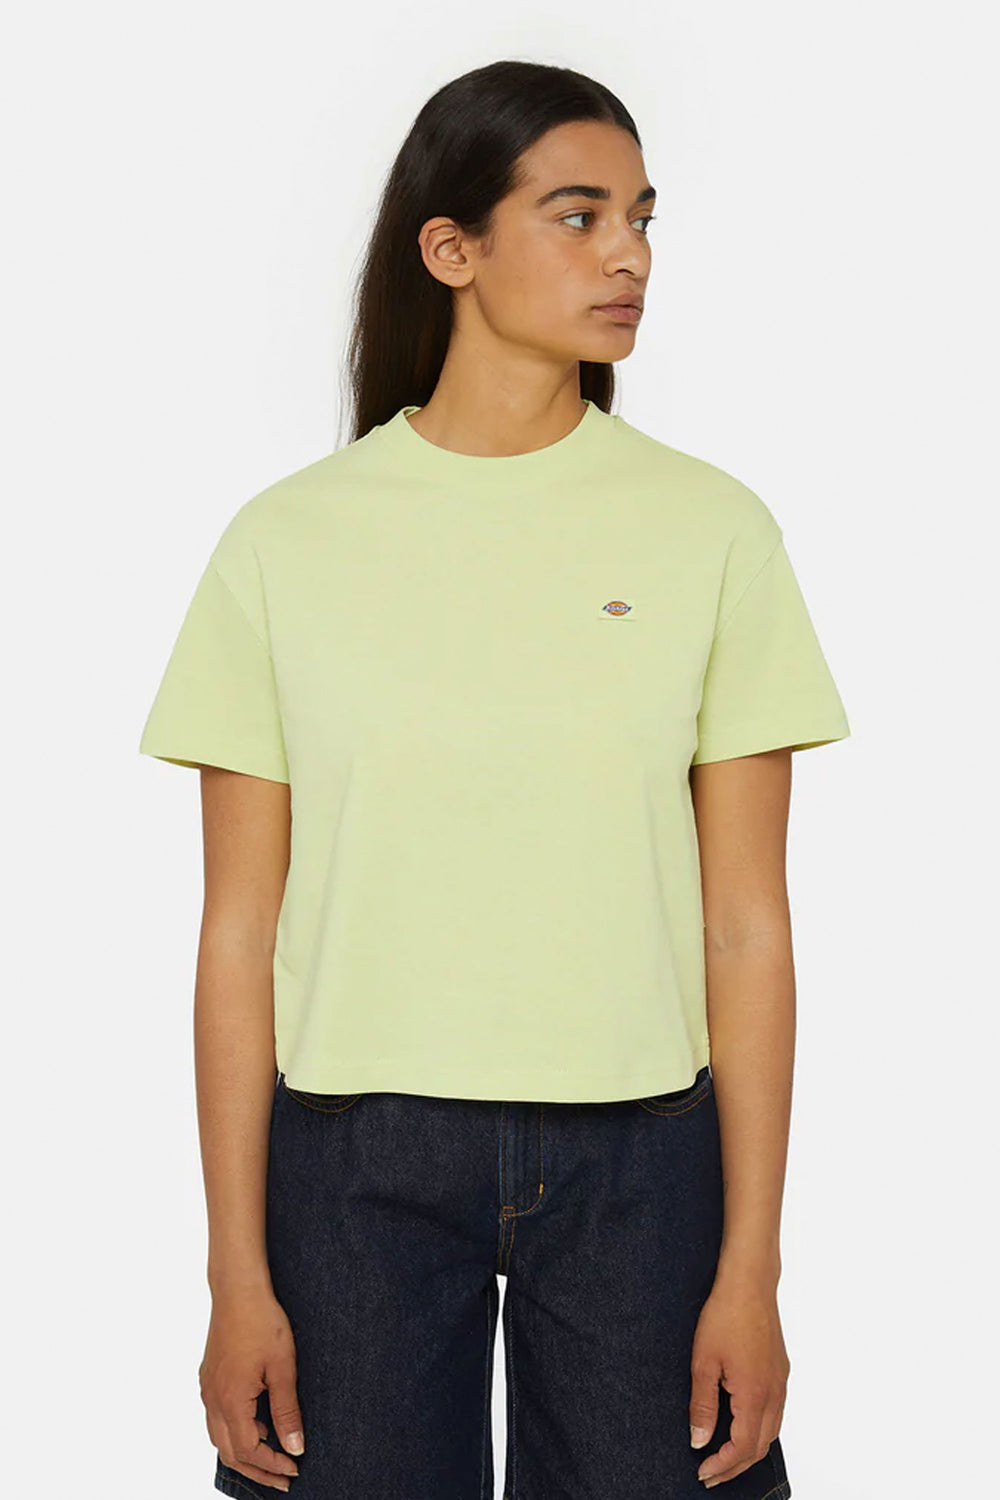 PUKAS-SURF-SHOP-WOMAN-TEE-DICKIES-OAKPORT-BOXY